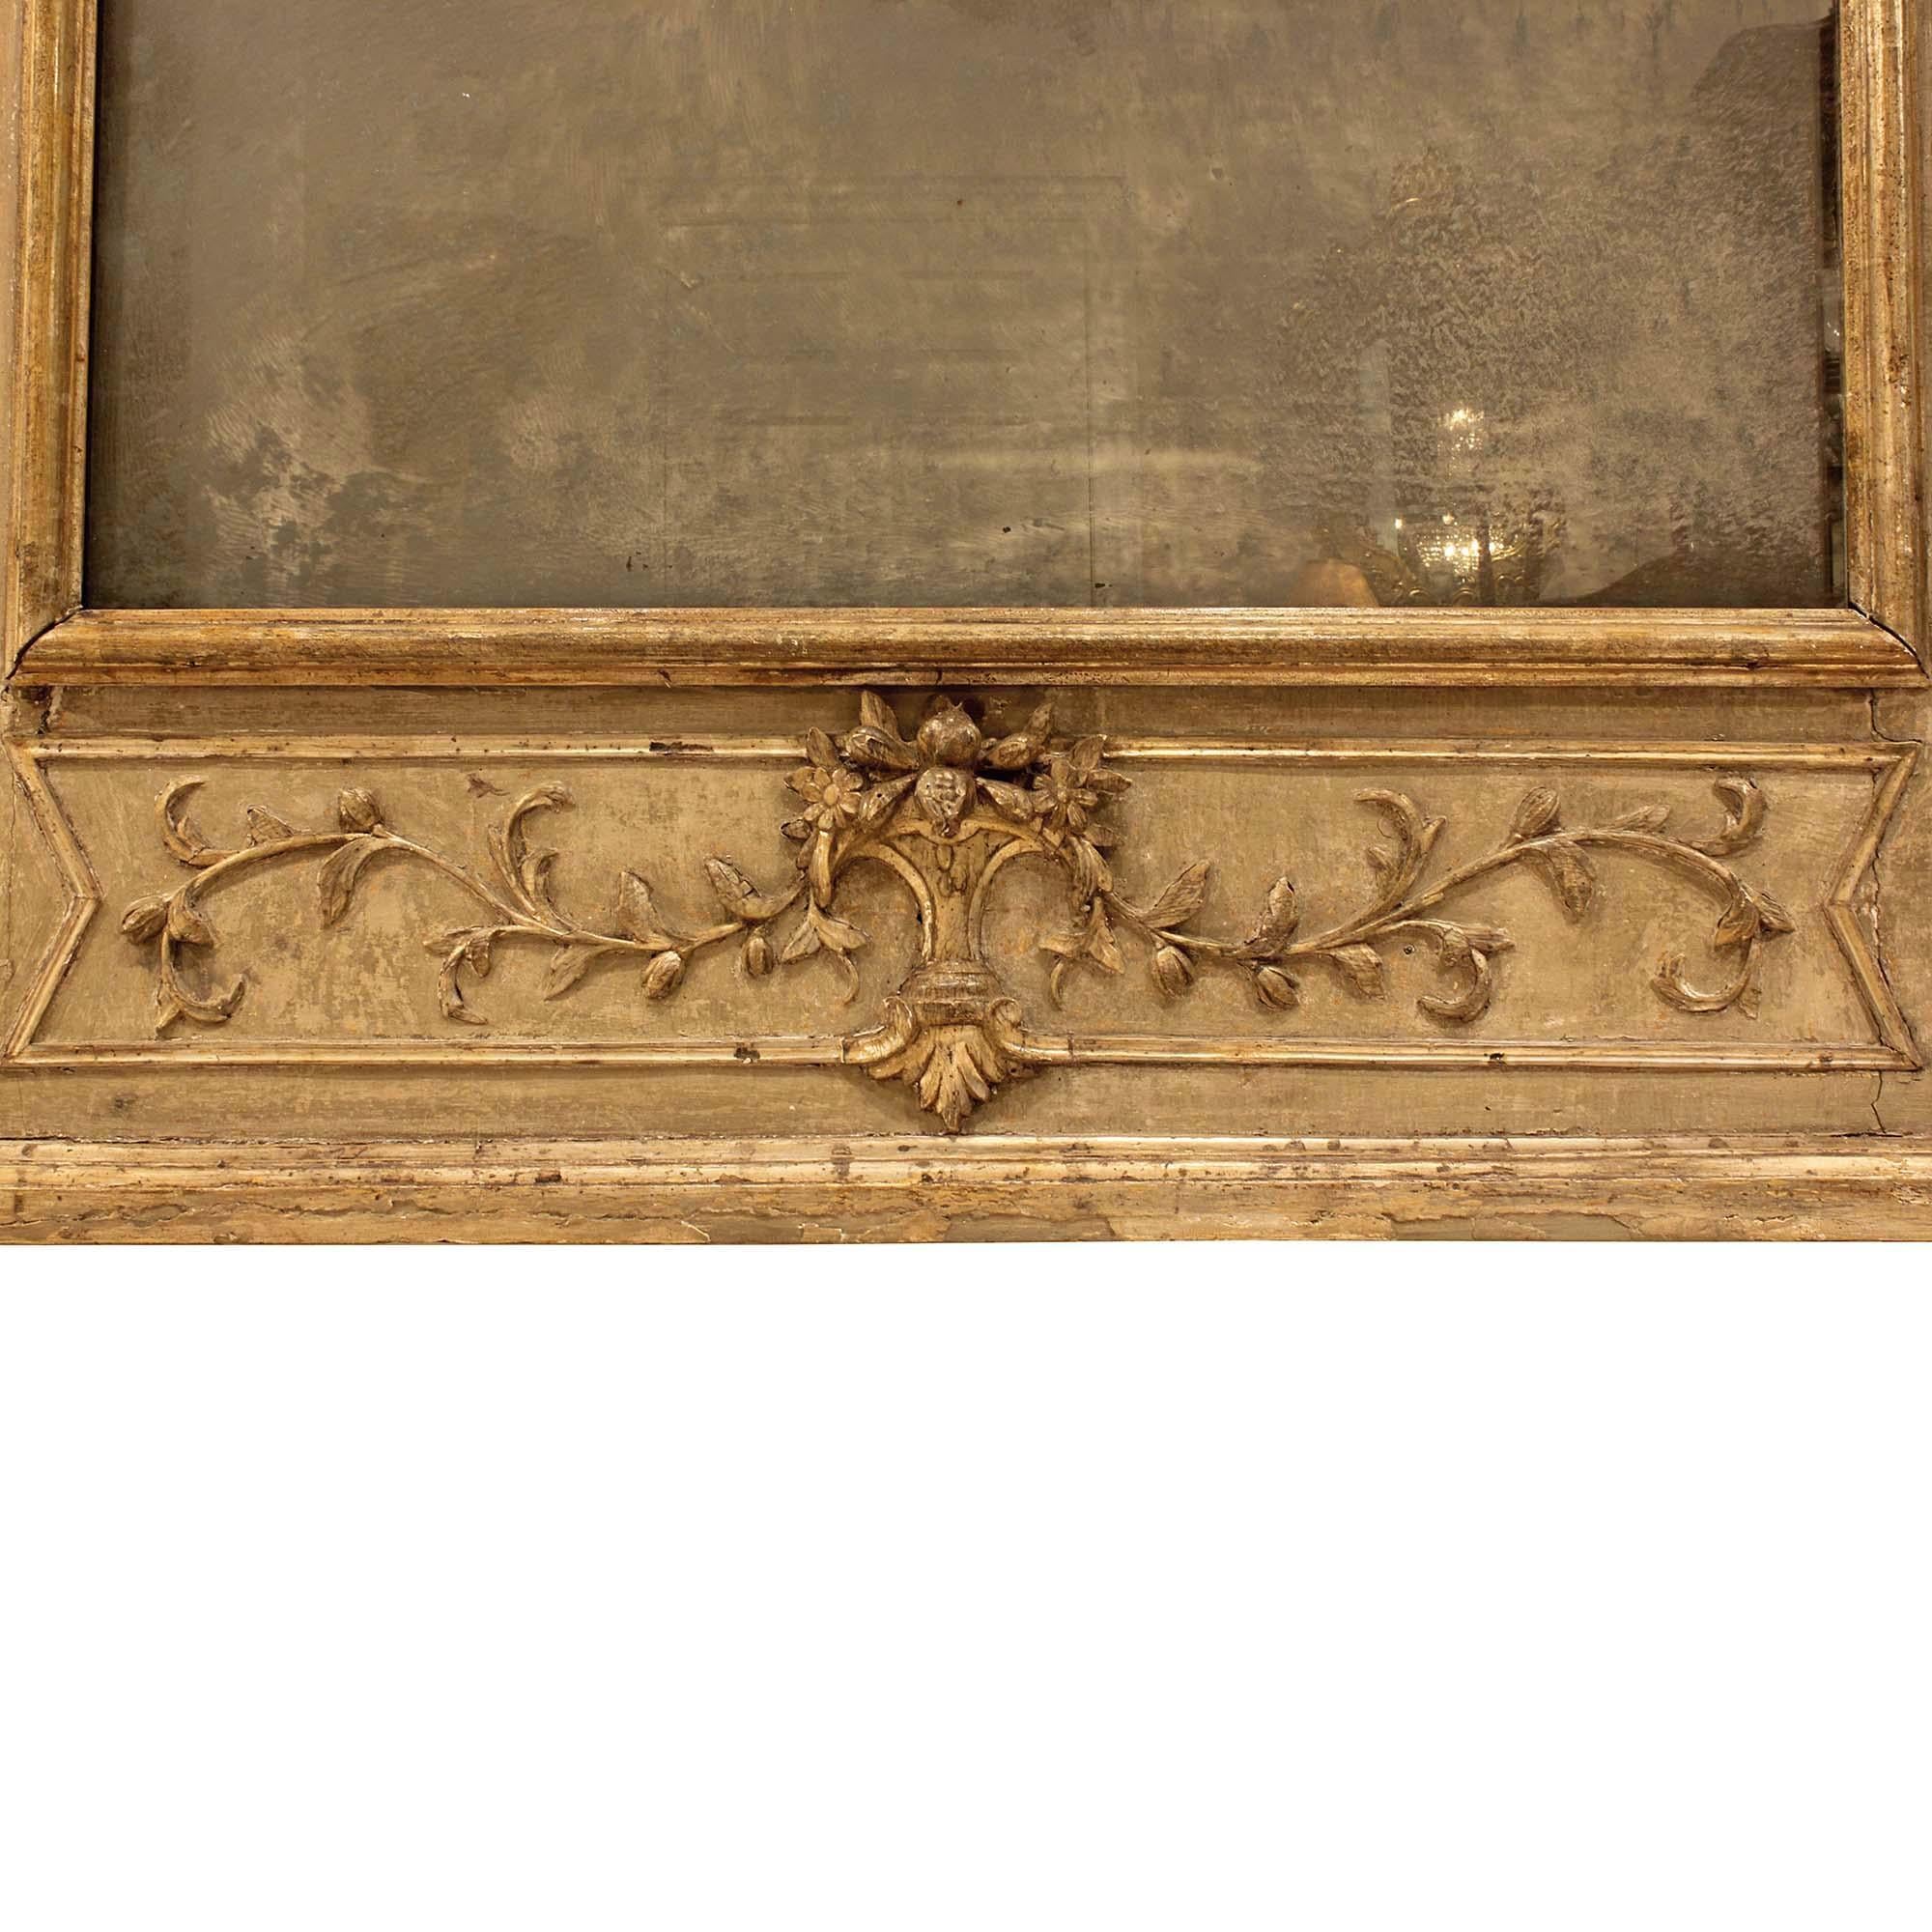 A stunning pair of Italian 18th century Louis XVI period patinated mirrors. Each rectangular mirror has rich carvings throughout and two original mirror plates. The bottom is decorated with a bouquet of flowers and fruit, amidst garlands and flanked